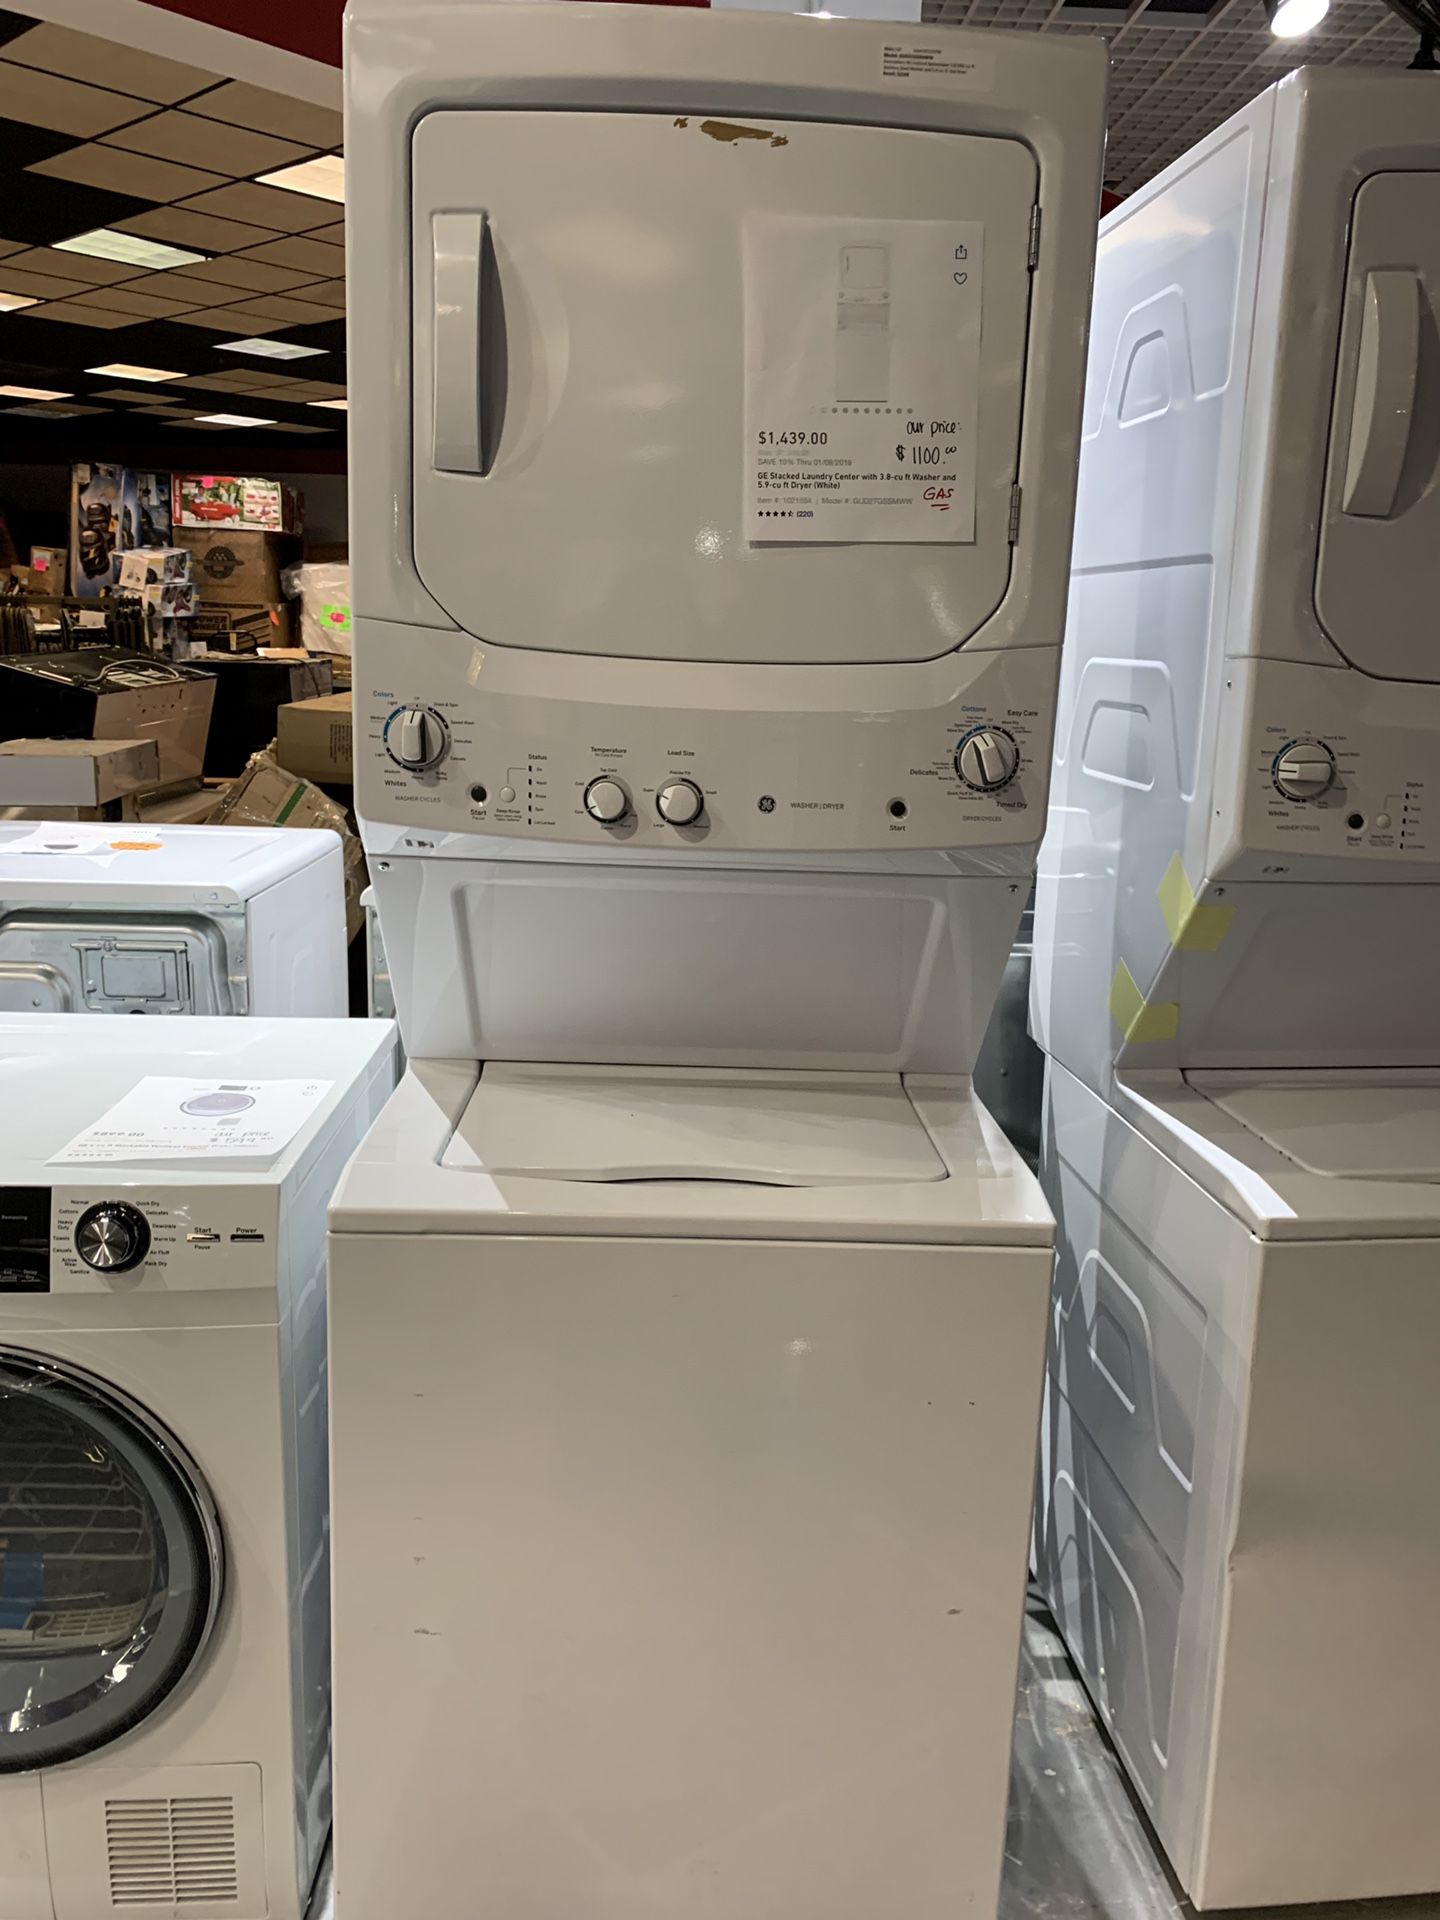 GE stacked laundry center with 3.8 cu for washer and 5.9 cu ft dryer - gas White Model# GUD27GSSMWW 1 year manufactures warranty included Retails: